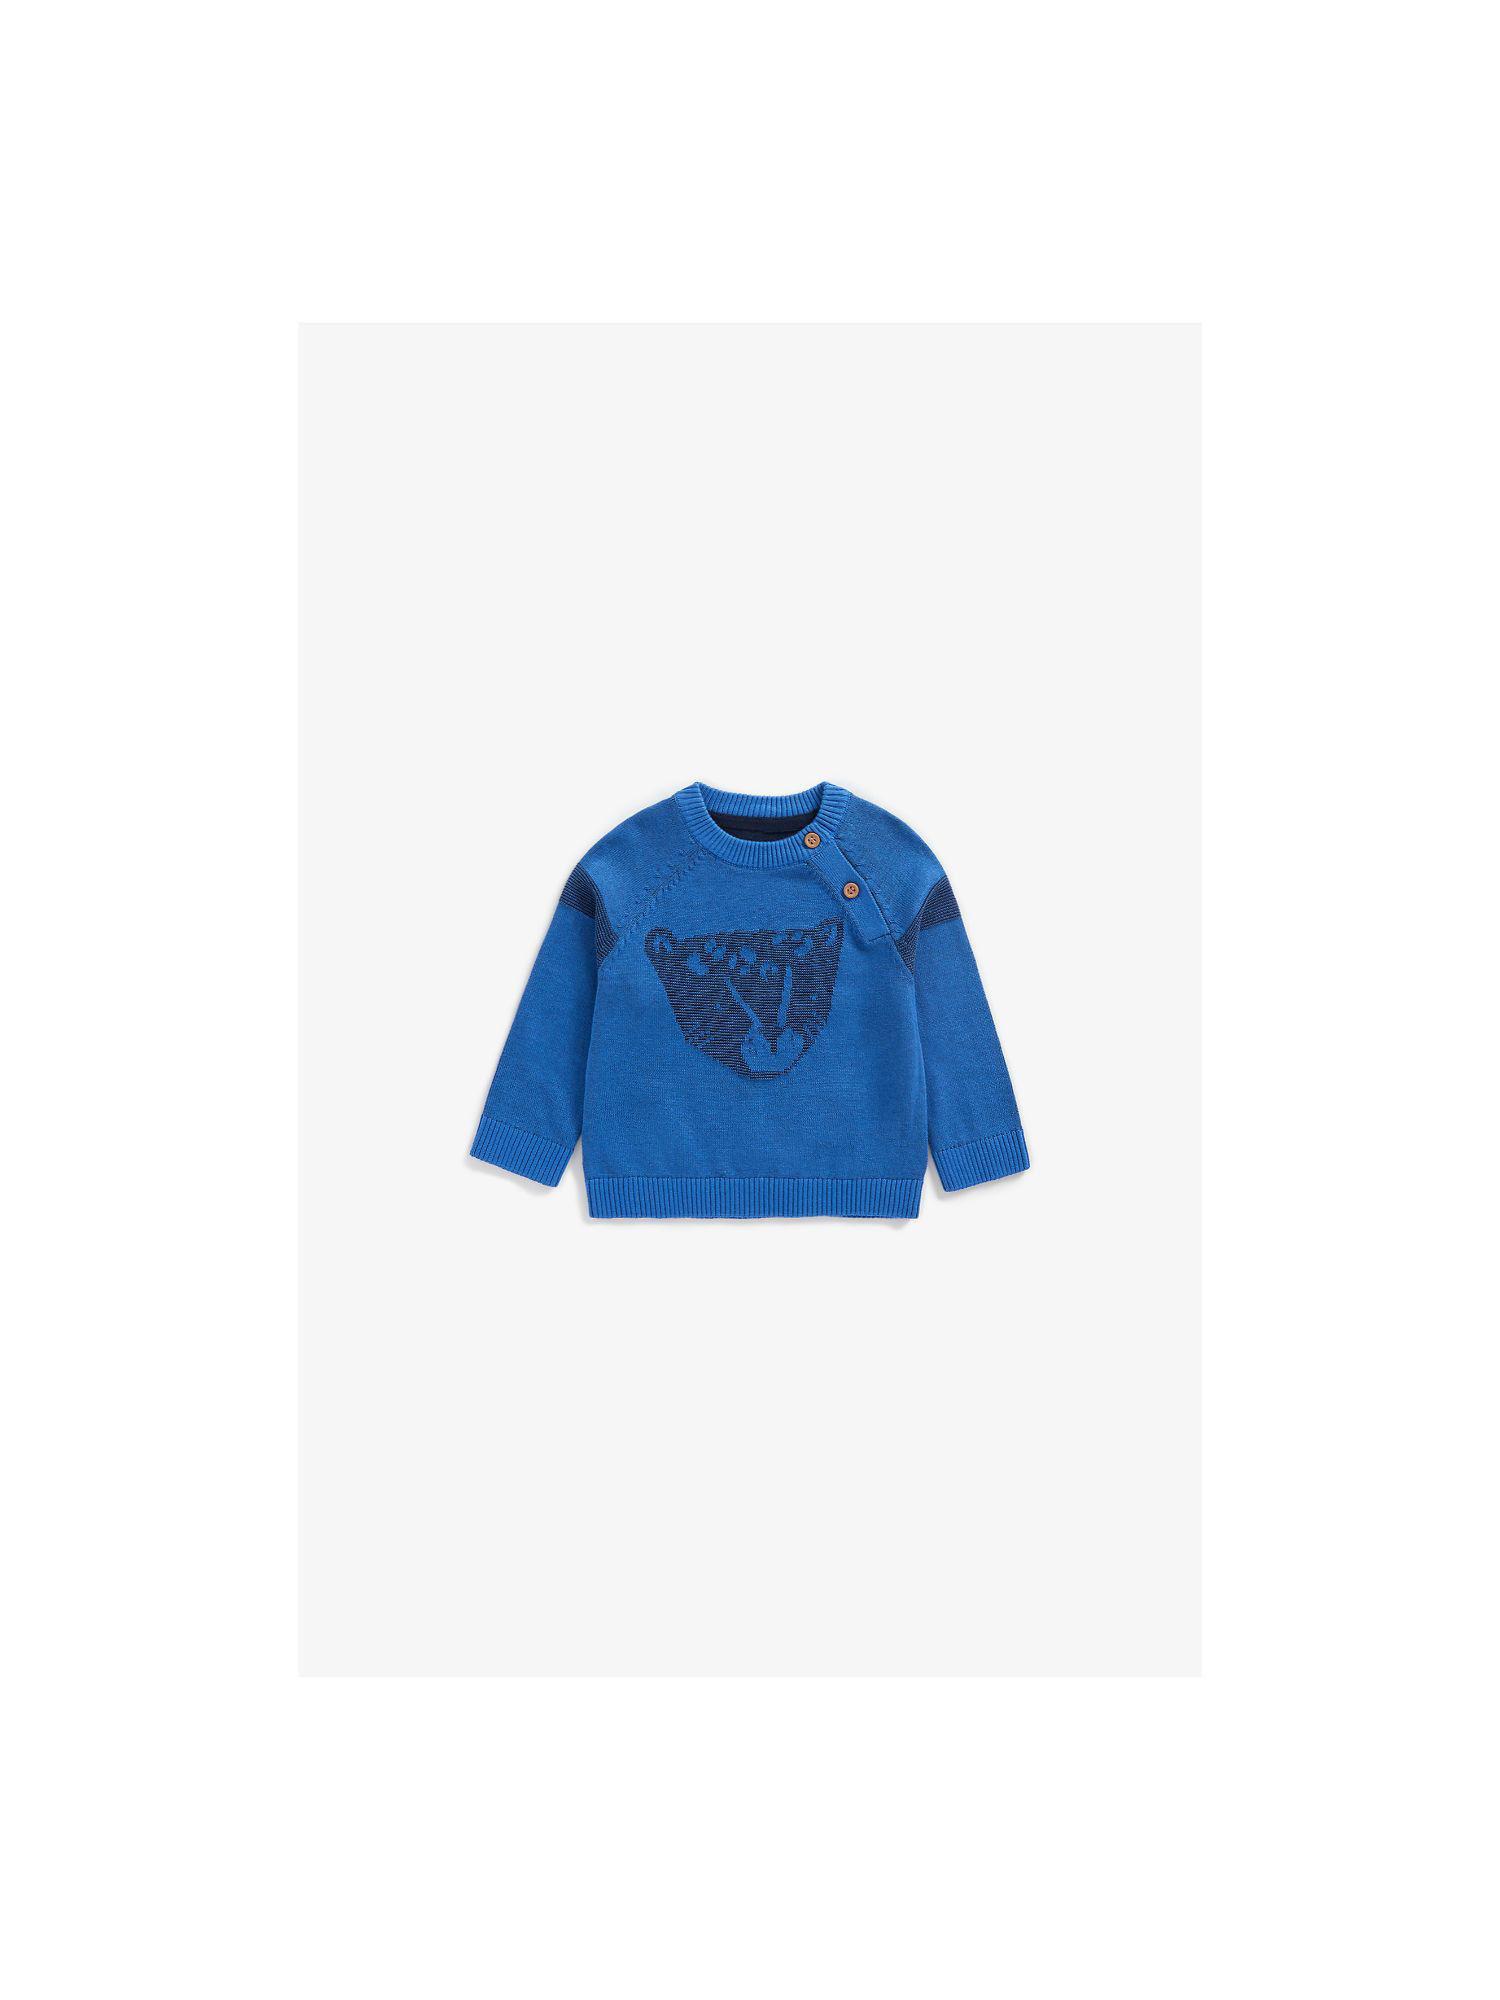 mother care mb cm blue leopard face knit sweater